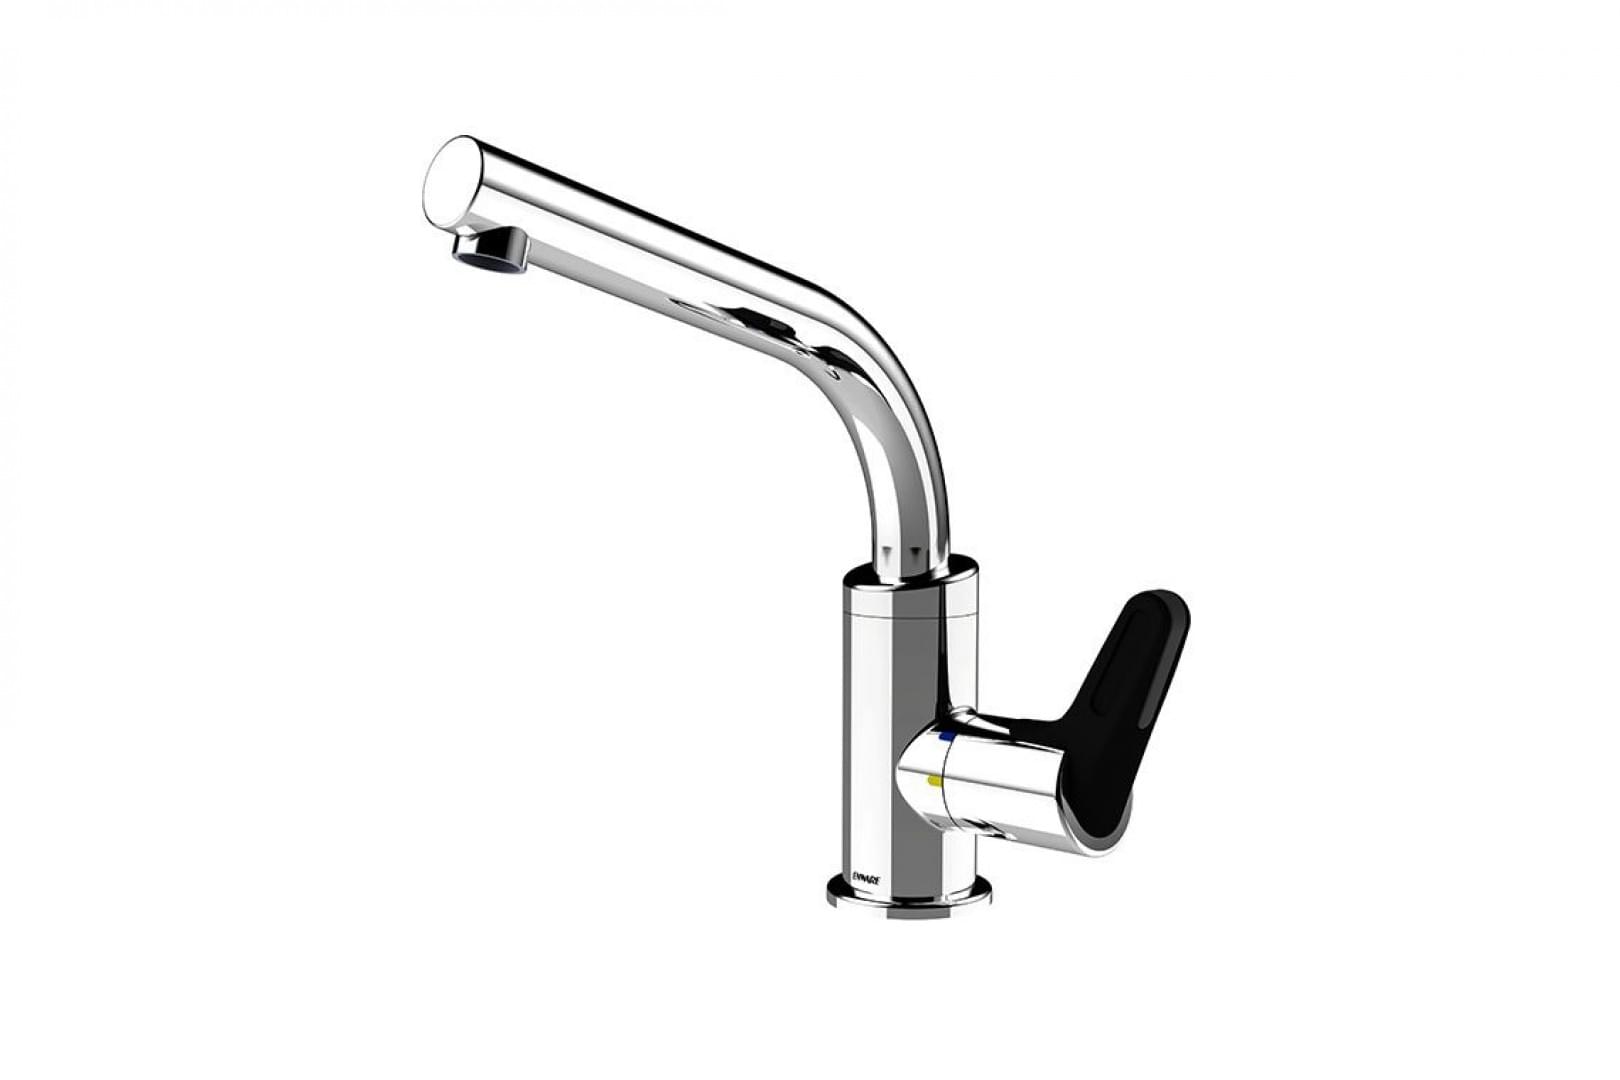 Enware Wellbeing Sequential Basin Mixer 65mm Lever with 165mm Spout - WBBSQ65-165-5 from Enware